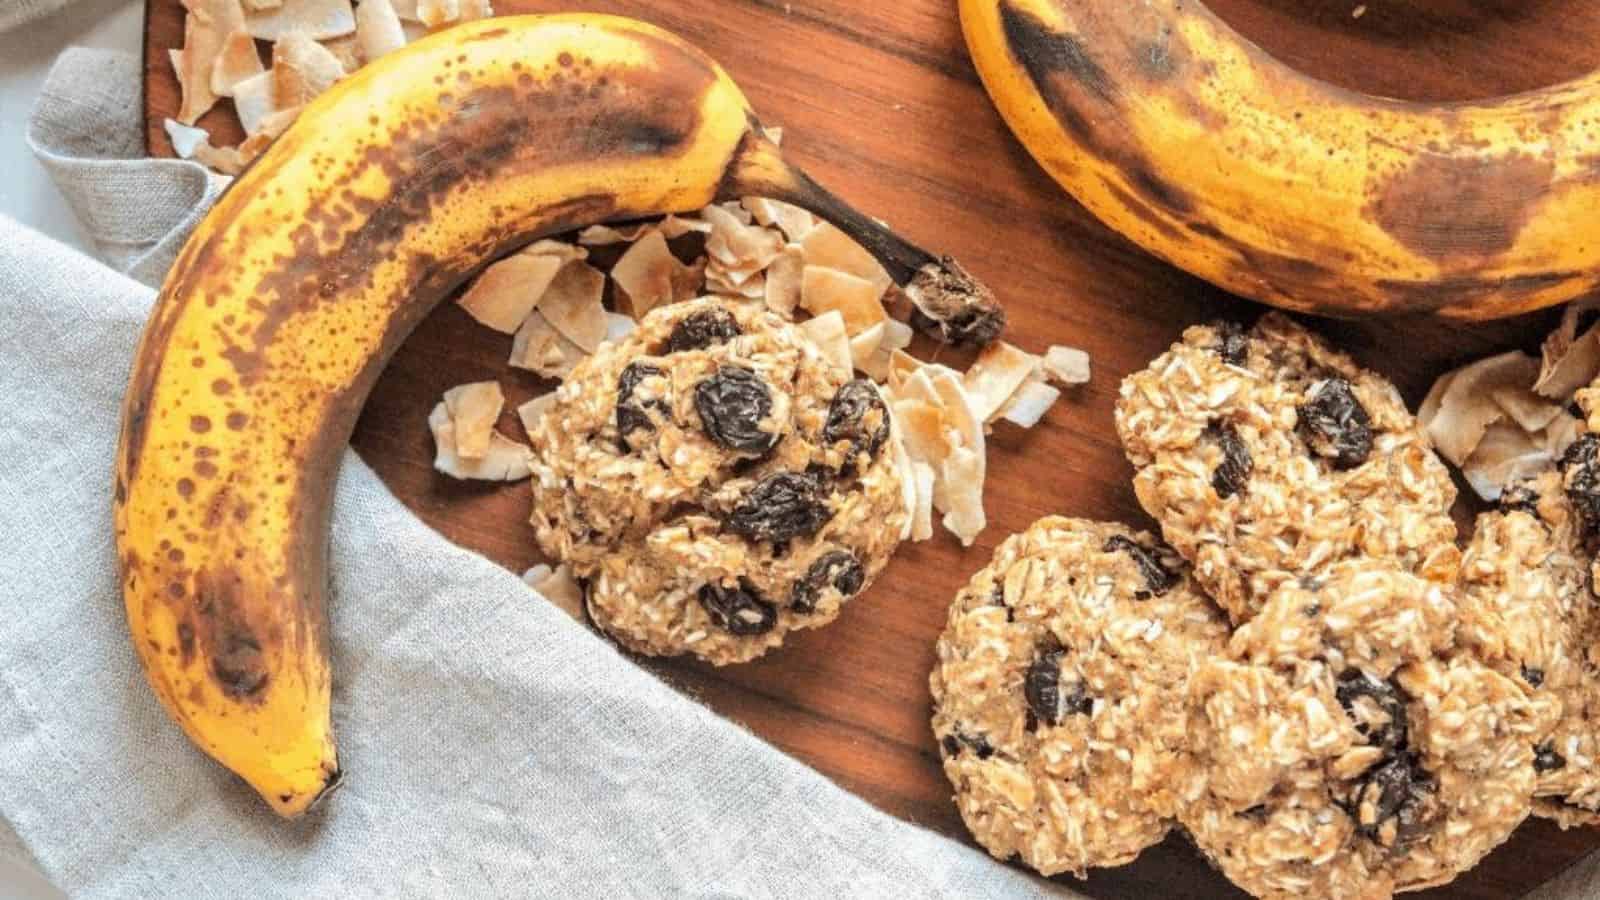 A wooden platter with oatmeal raisin cookies next to a banana.